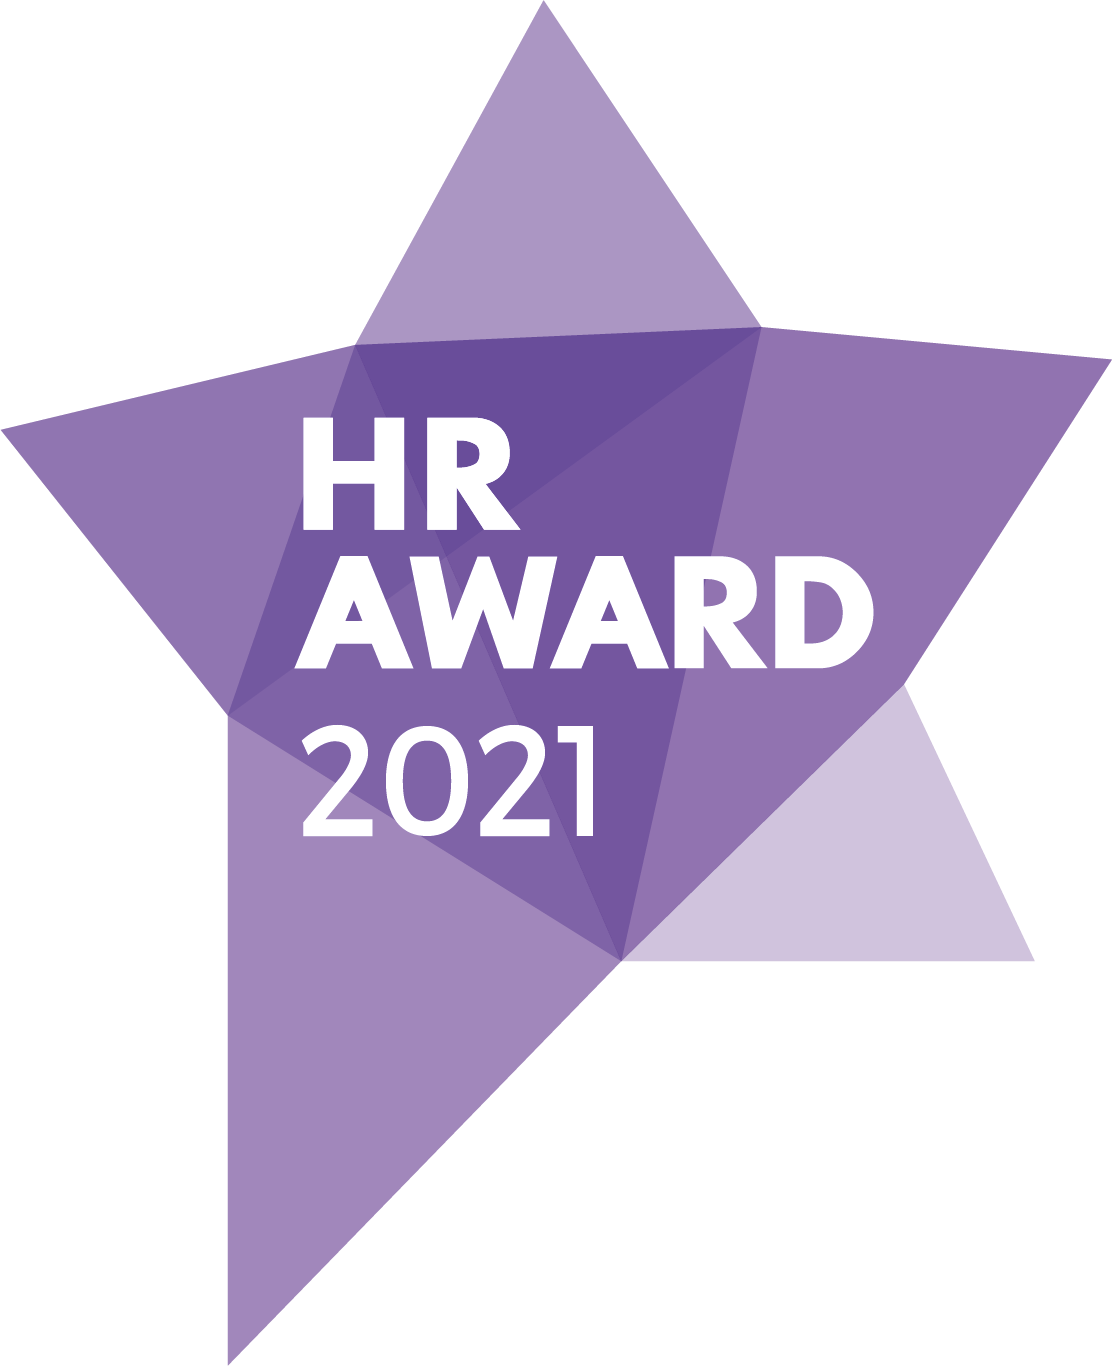 HR Award newcomer of the year